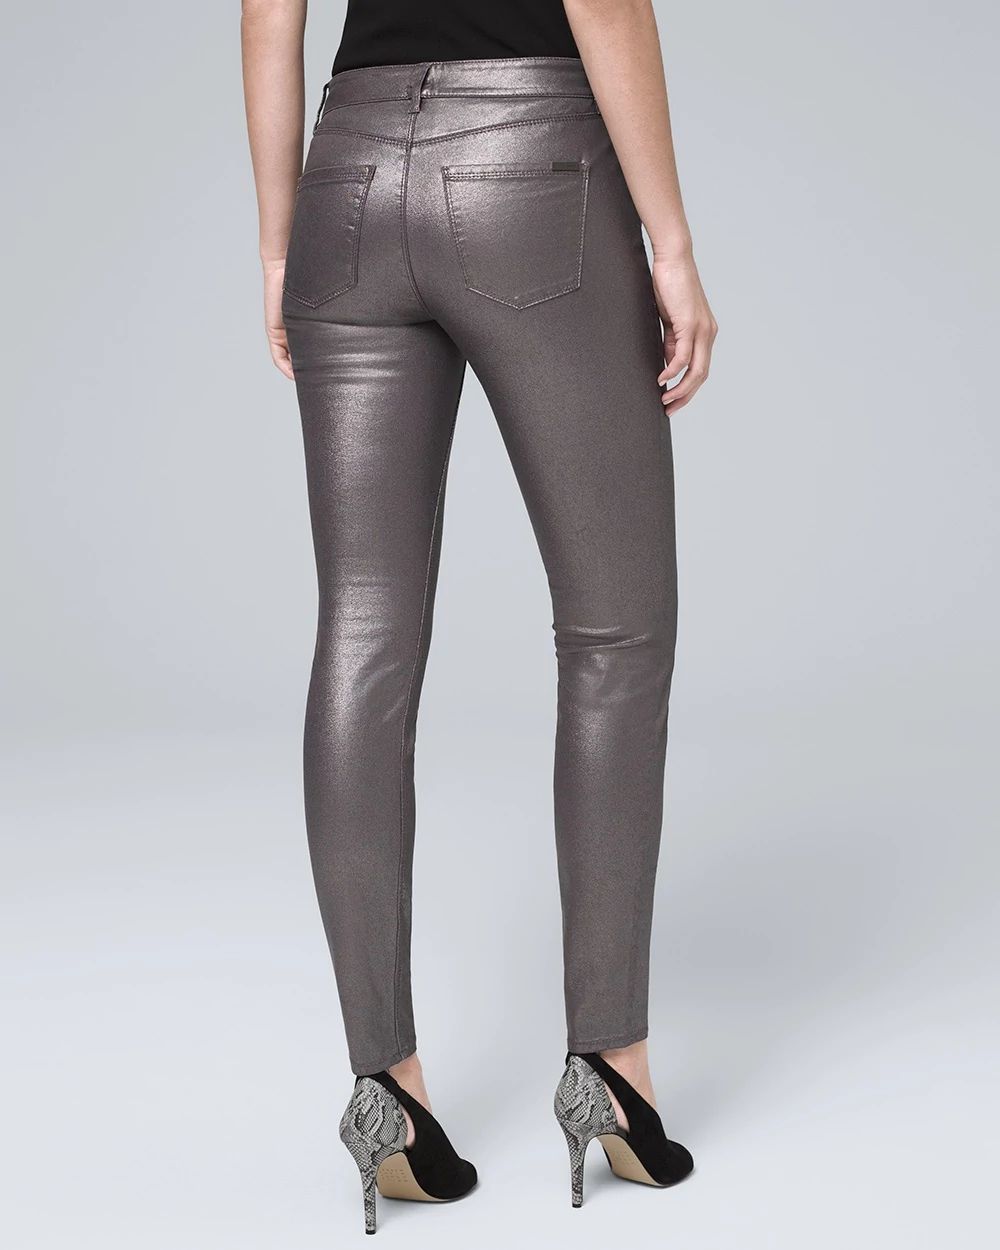 Mid-Rise Metallic Skinny Ankle Jeans click to view larger image.